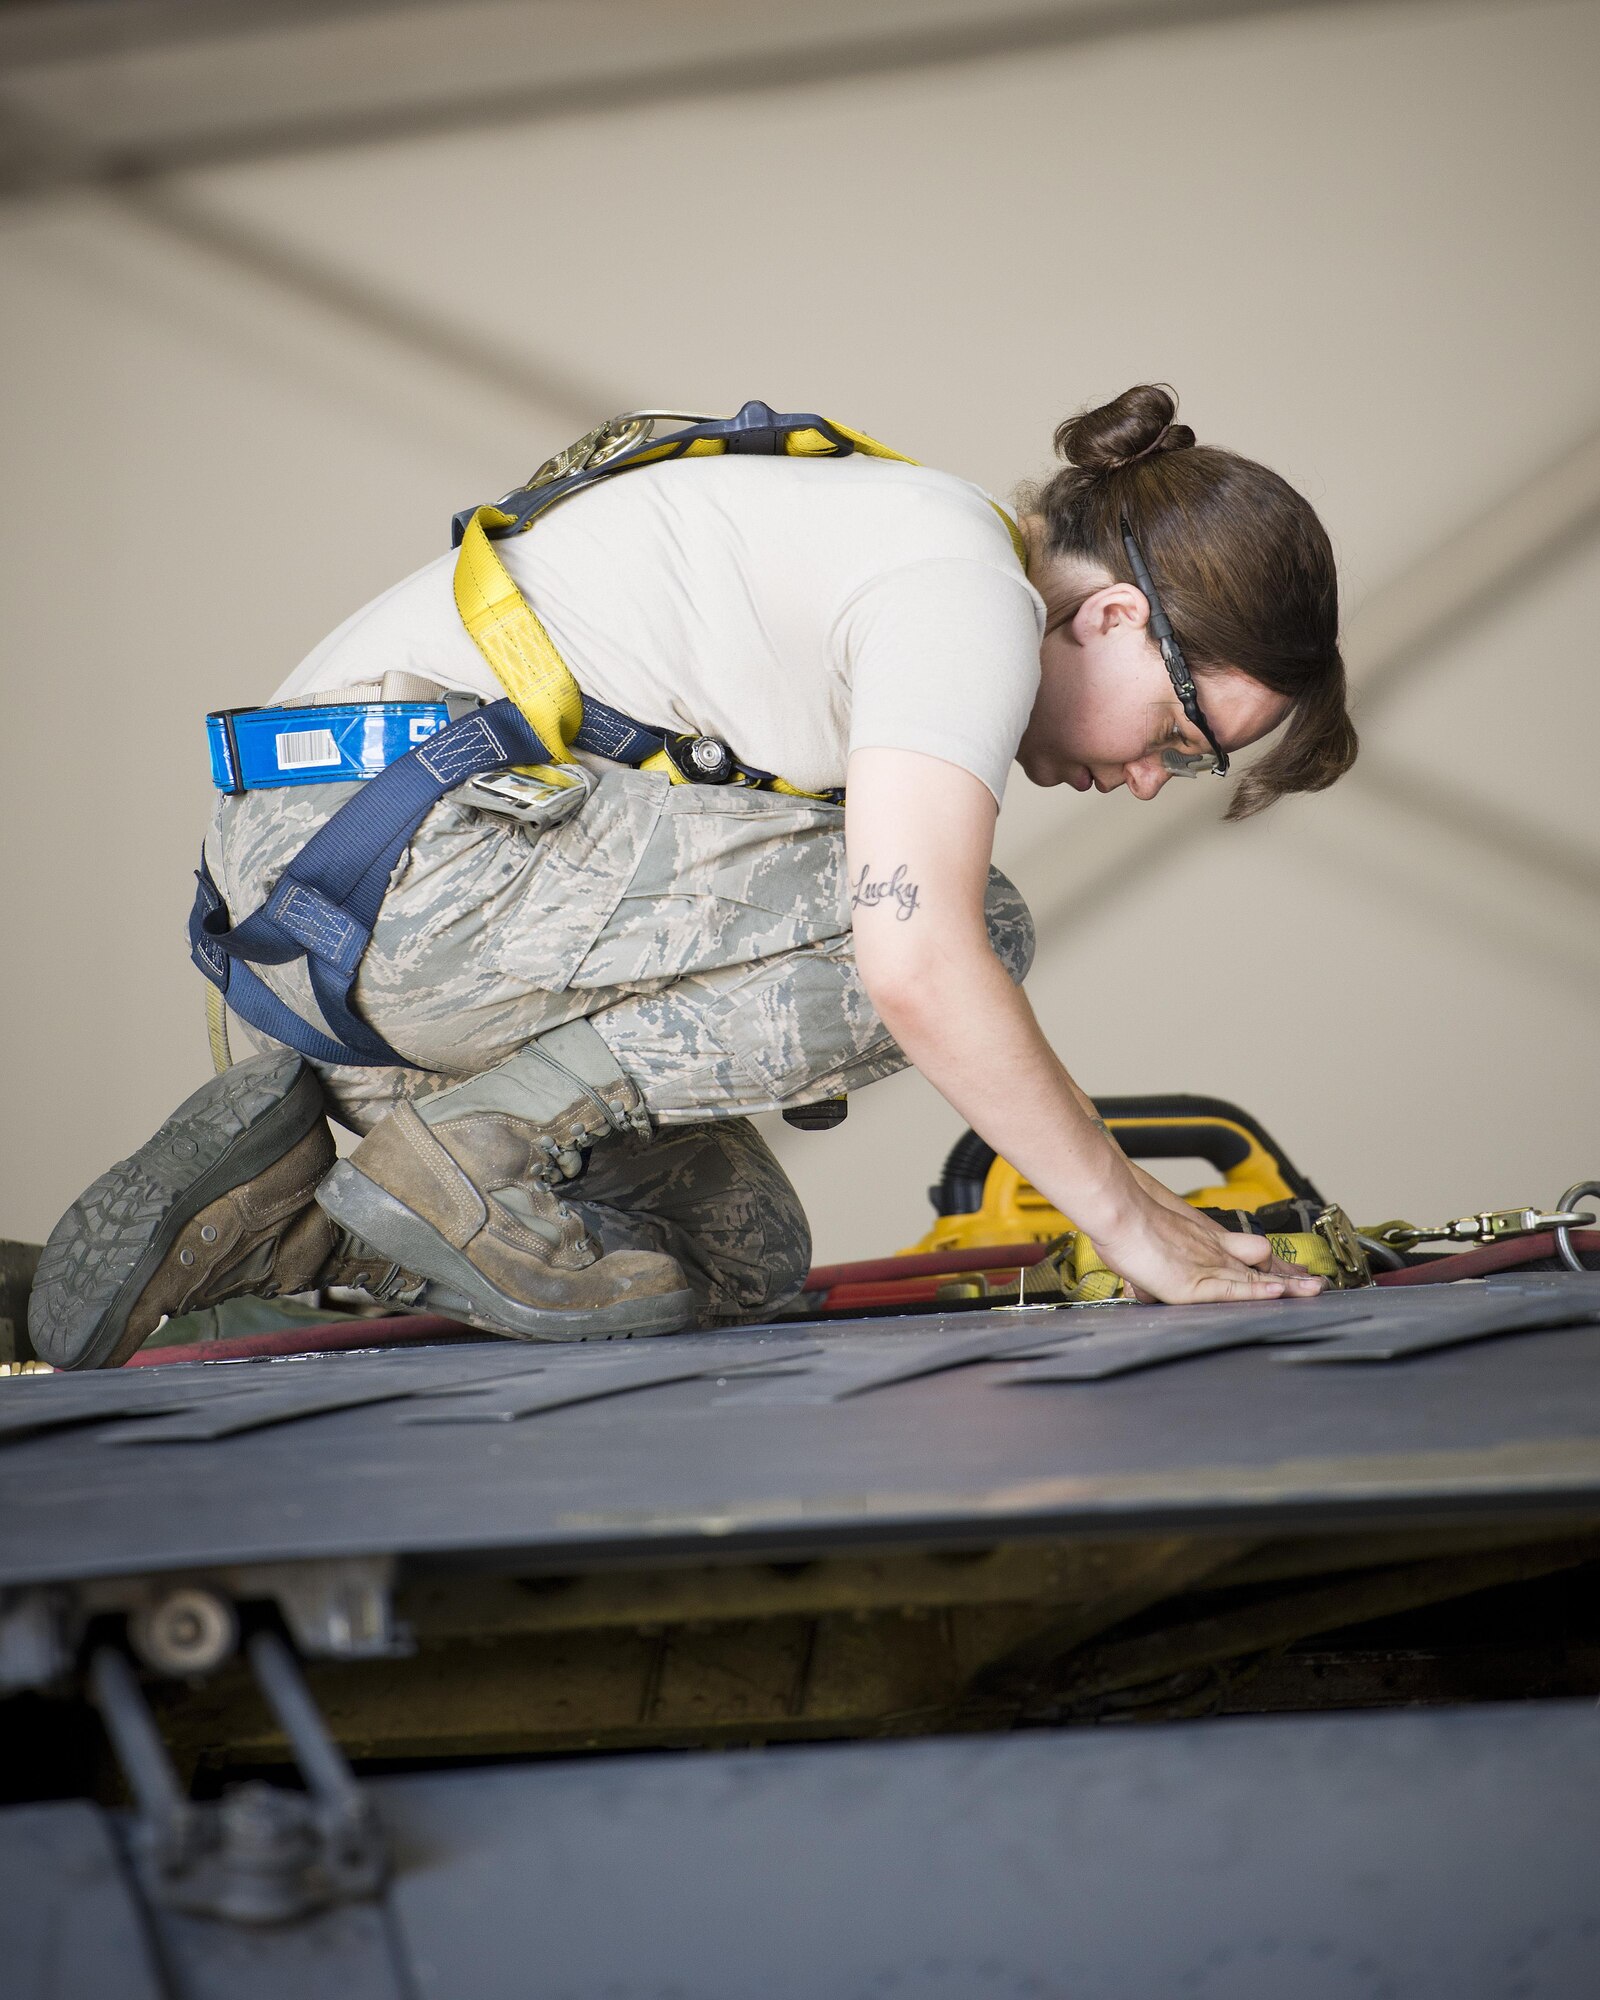 Senior Airman Amanda Scanlan, 5th Maintenance Squadron aircraft structural maintenance, inspects a patch on a spoiler atop the wing of a B-52H Stratofortress at Minot Air Force Base, N.D., August 2, 2016. Yellow sheet metal patches are riveted down to repair cracked spoilers on the B-52s.  (U.S. Air Force photo/Airman 1st Class J.T. Armstrong)